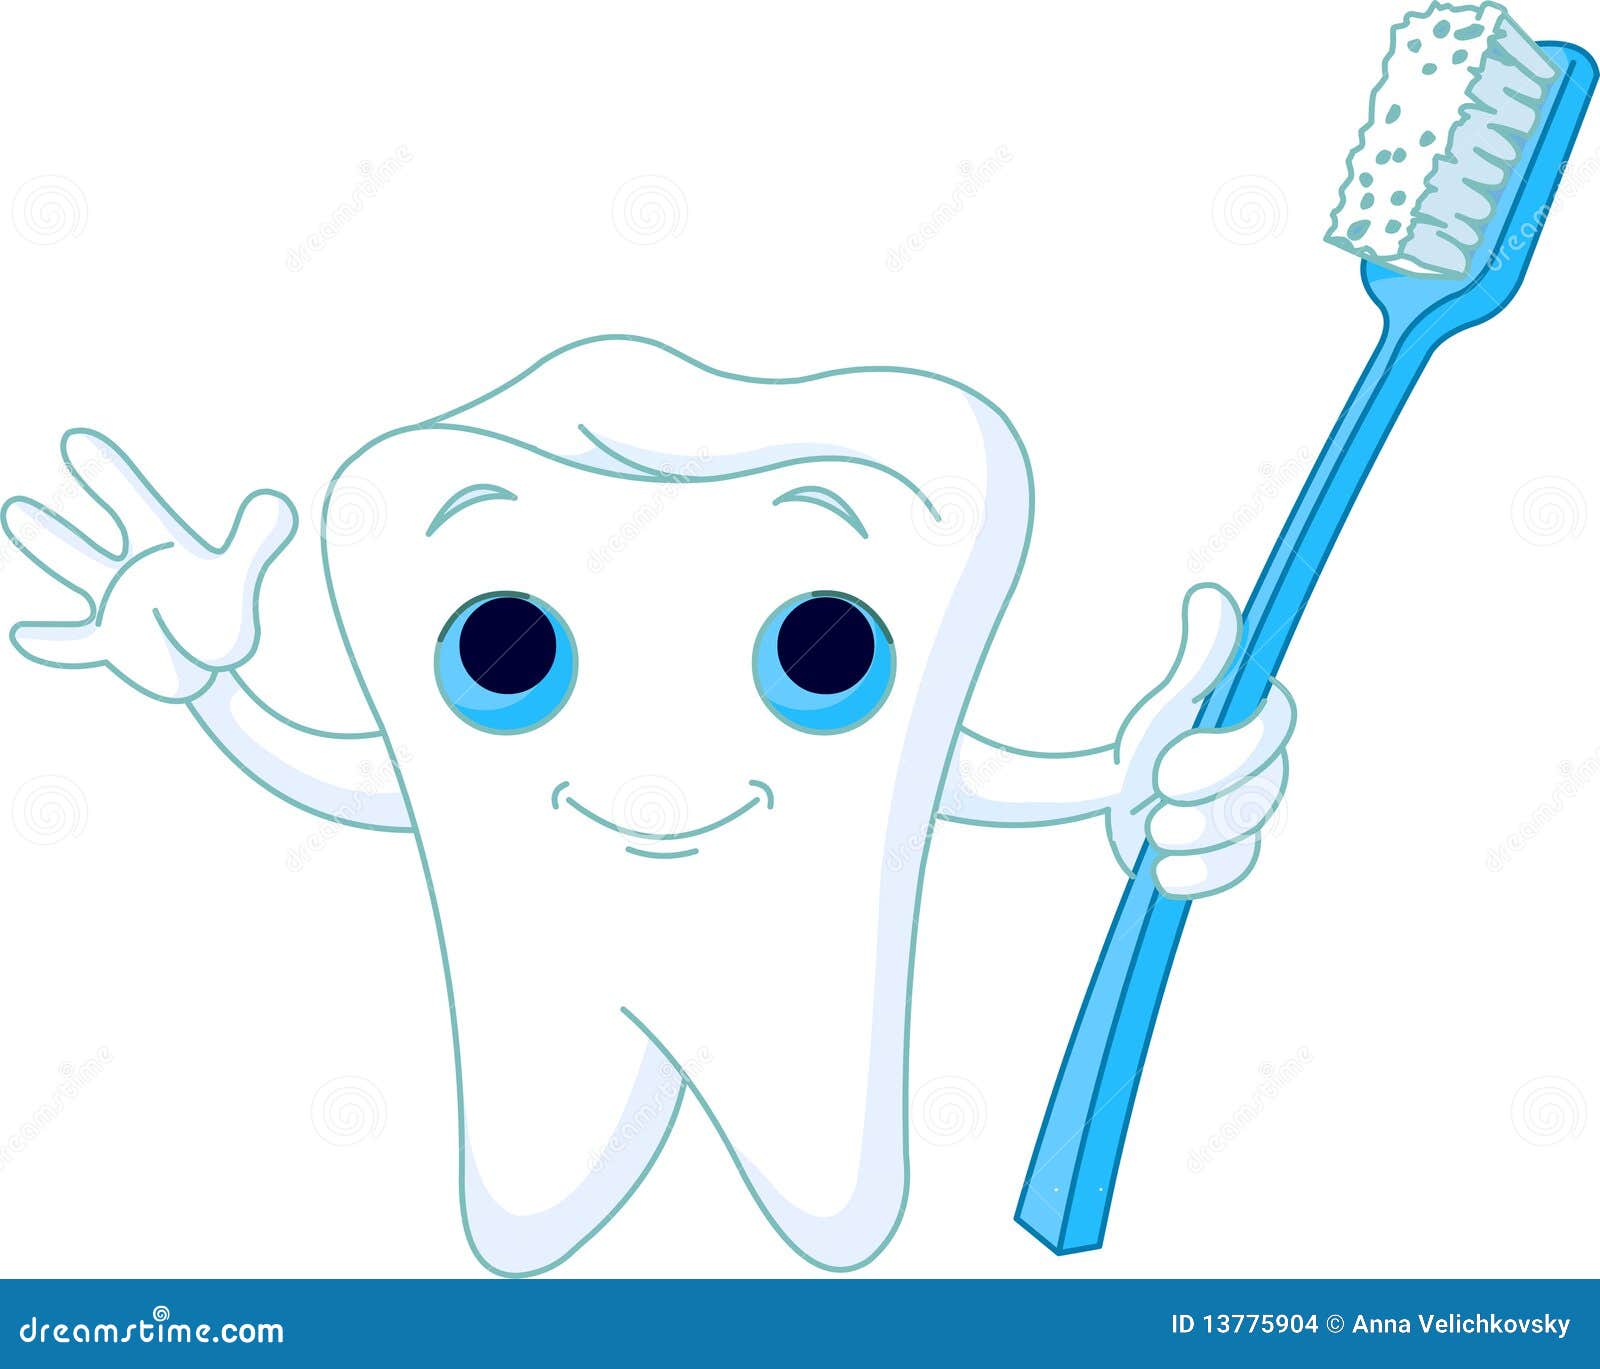 toothy smile clipart - photo #11